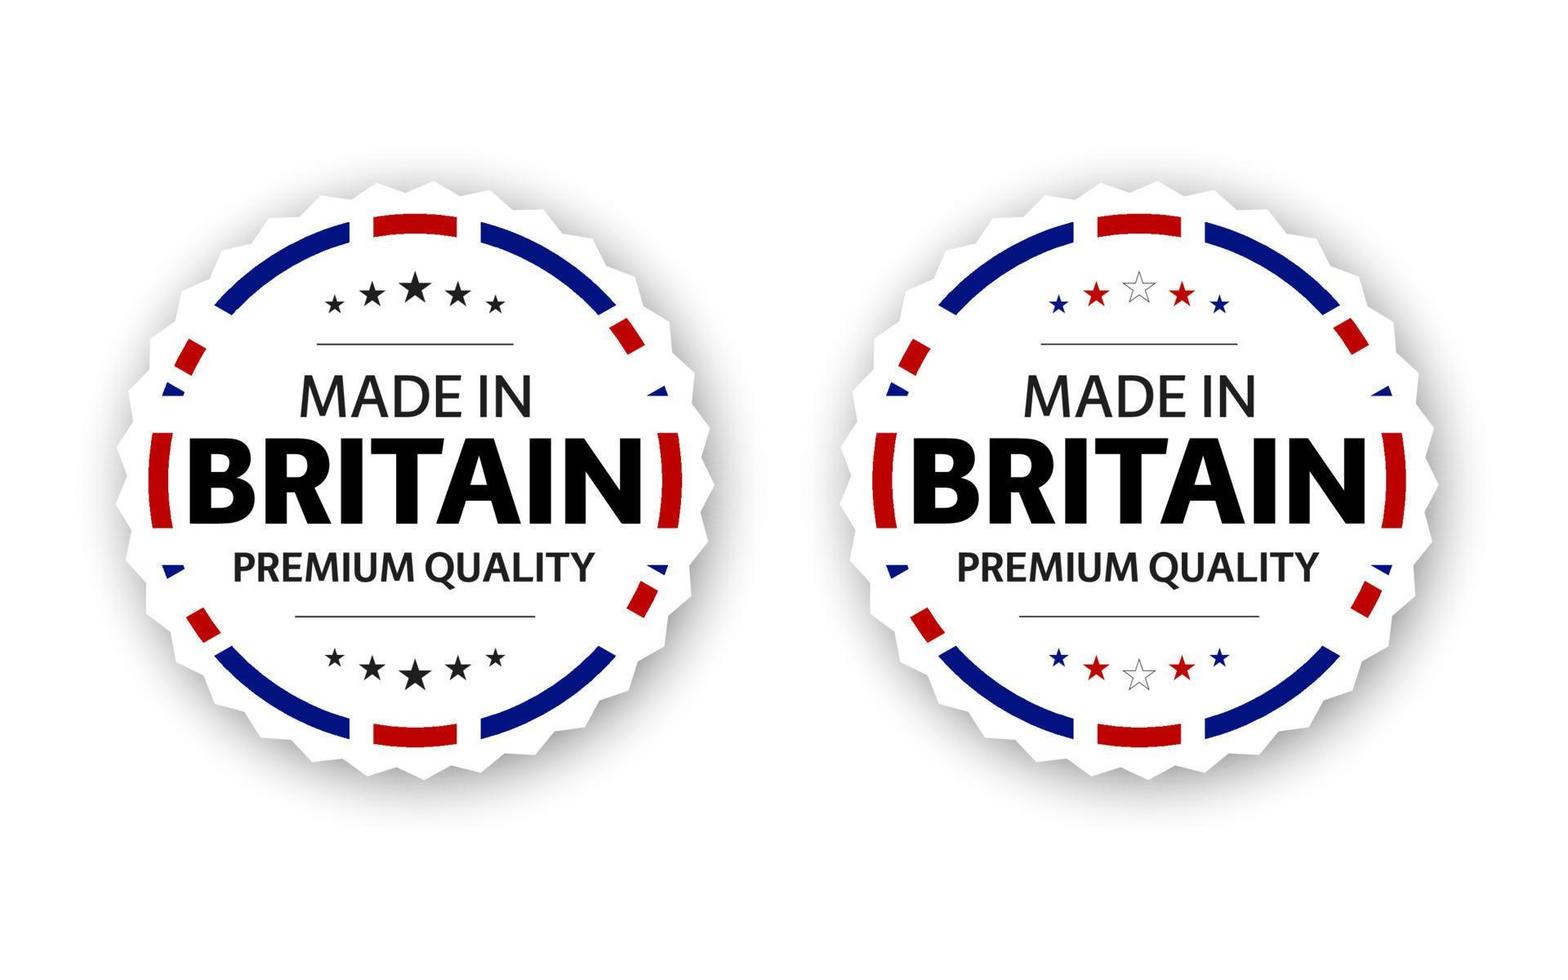 Set of two British labels. Made in Britain. Premium quality stickers and symbols with stars. Simple vector illustration isolated on white background